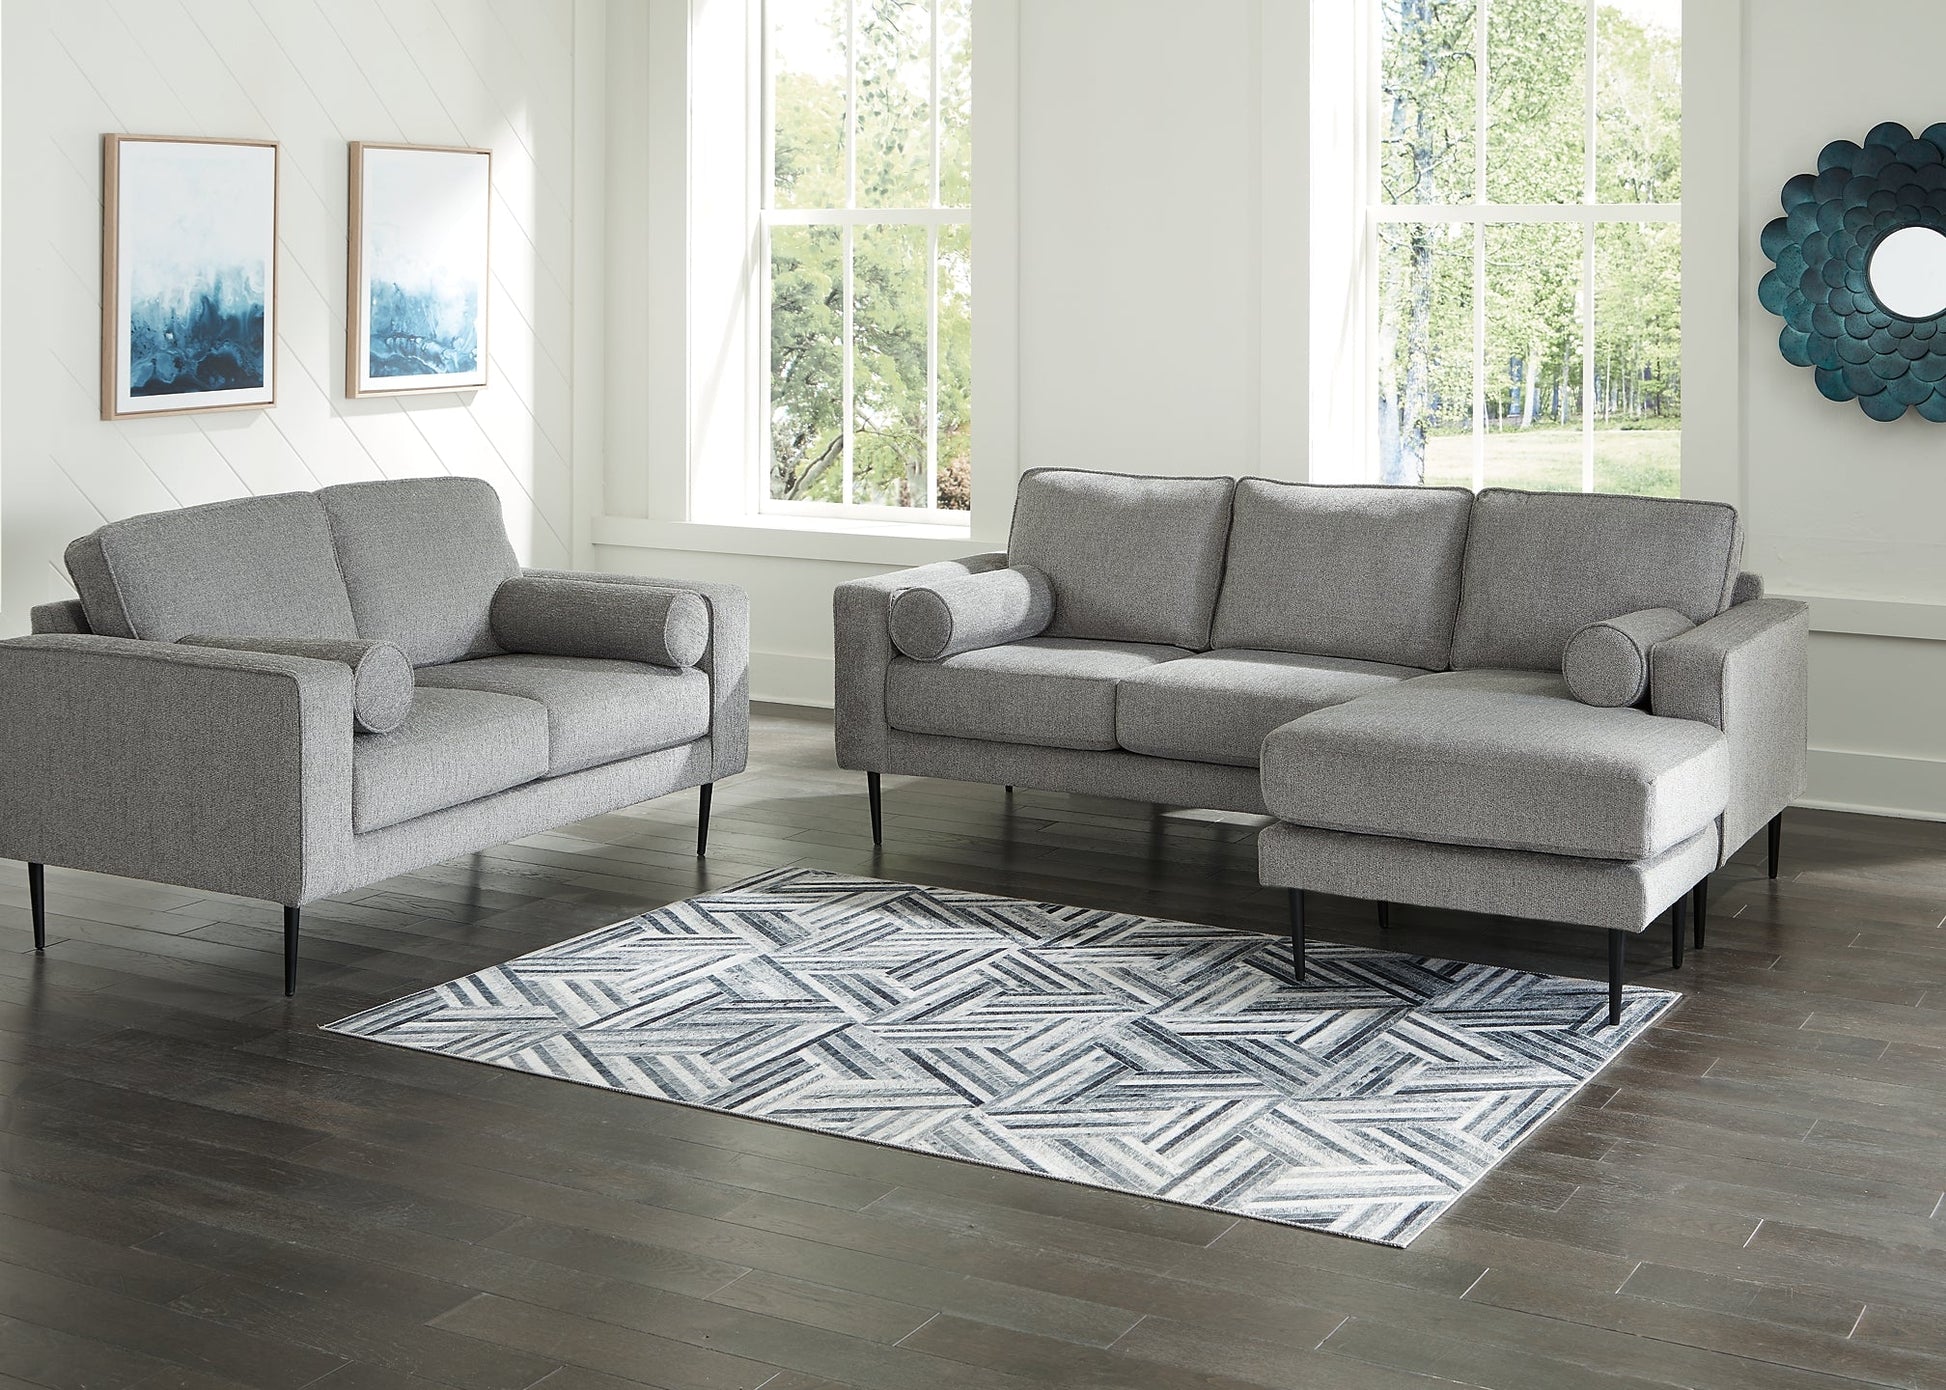 Hazela Sofa Chaise and Loveseat at Walker Mattress and Furniture Locations in Cedar Park and Belton TX.